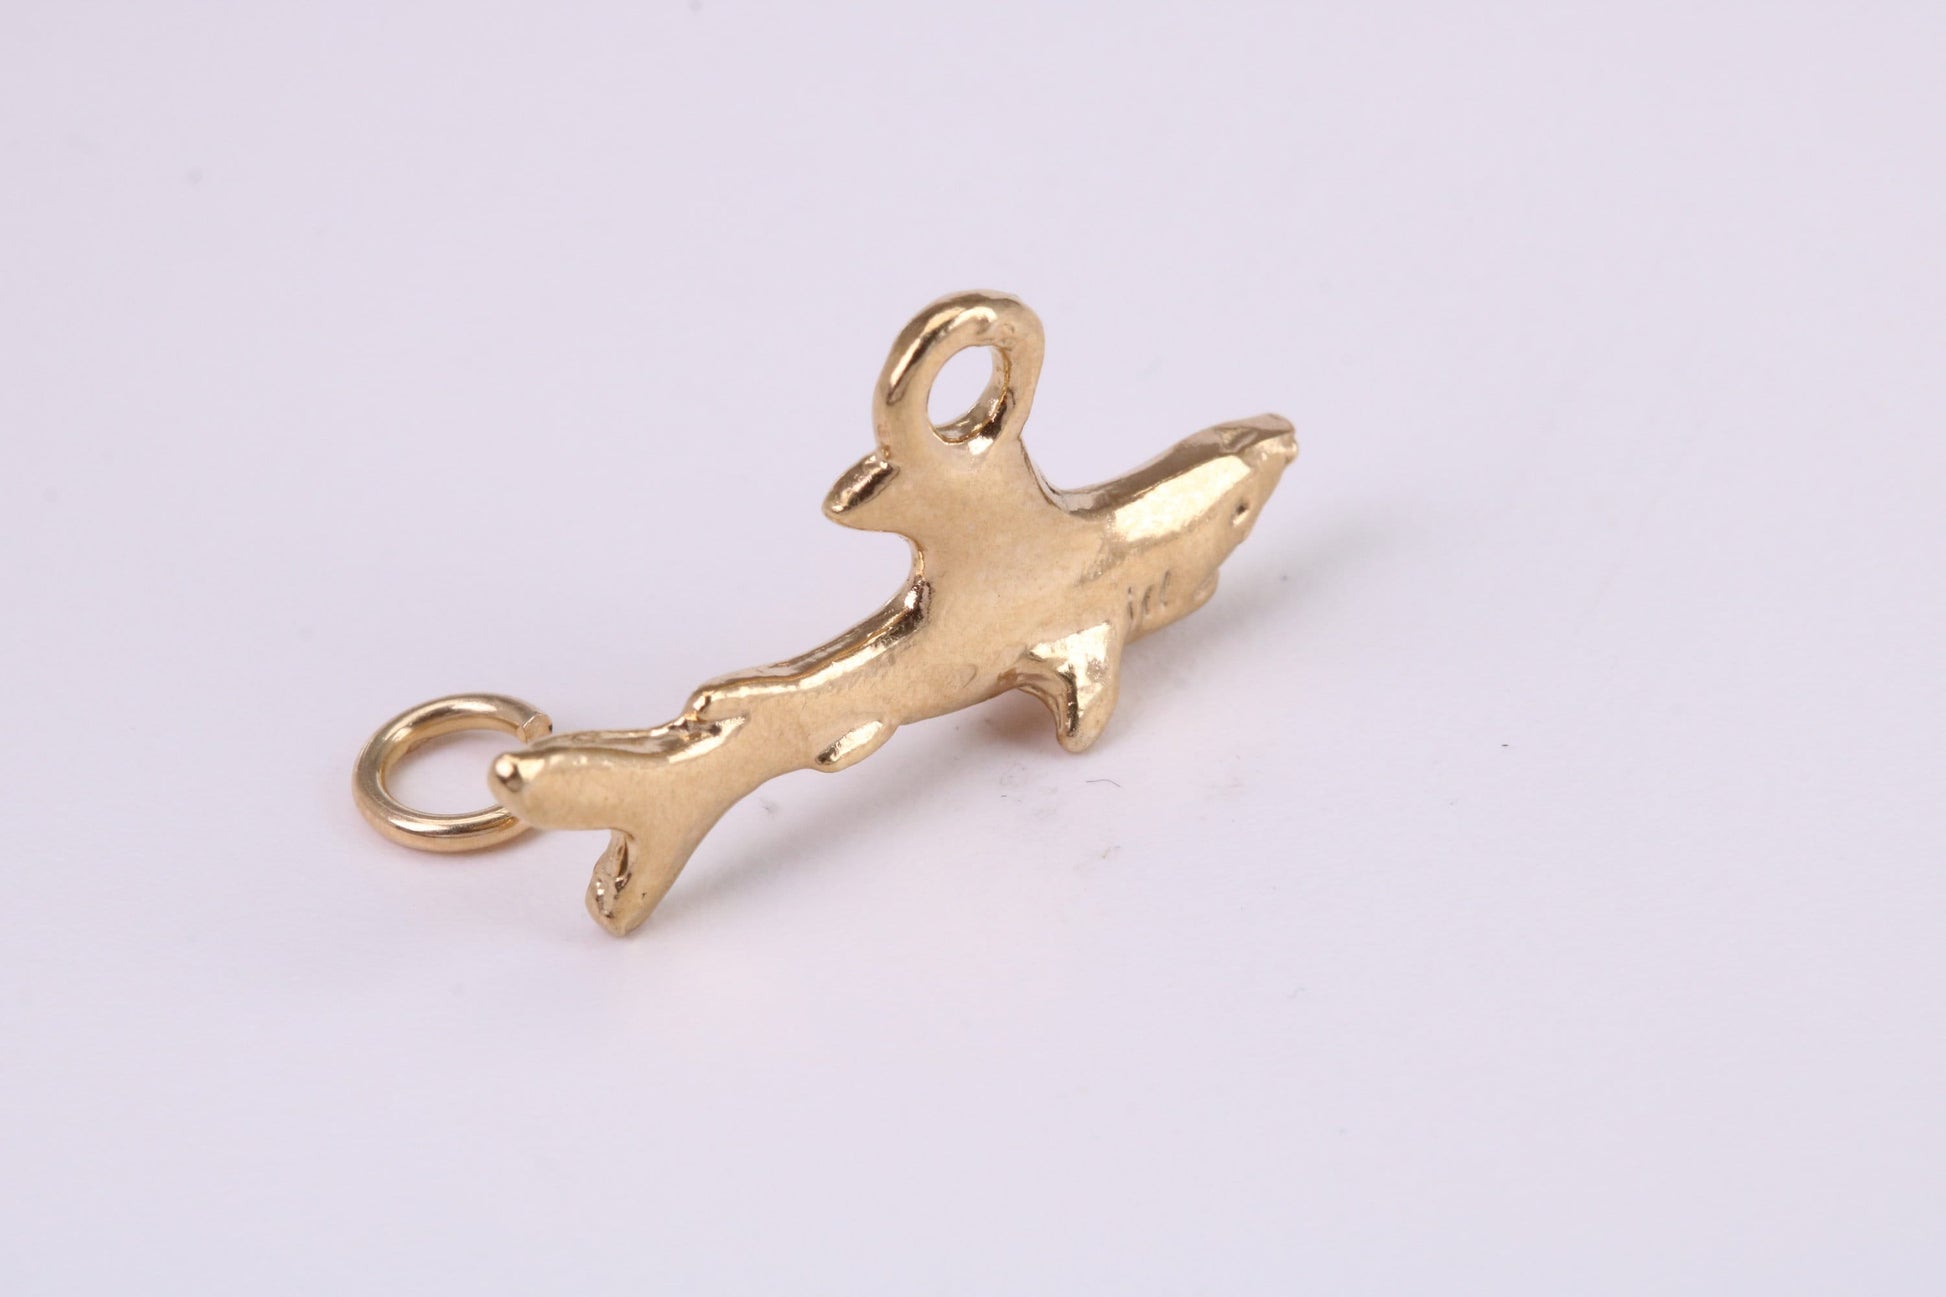 Shark Charm, Traditional Charm, Made from Solid Yellow Gold, British Hallmarked, Complete with Attachment Link